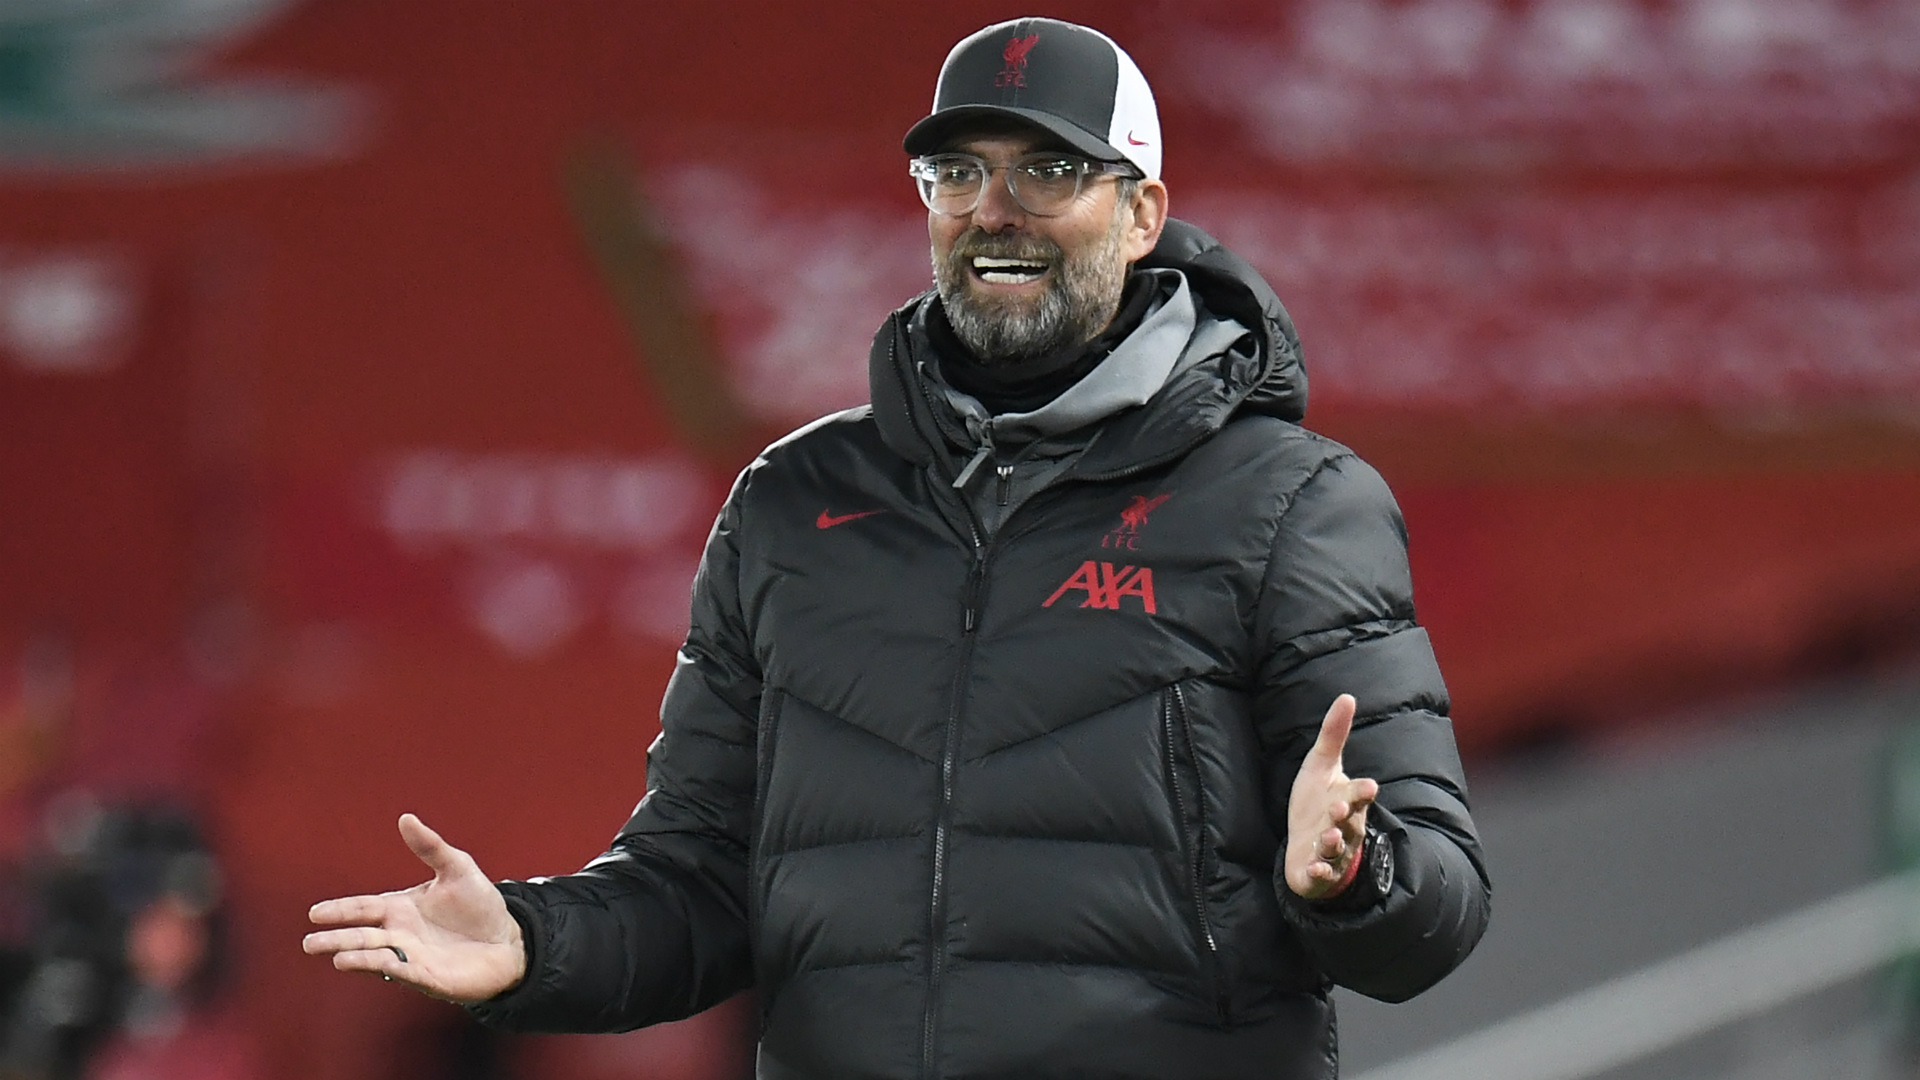 Klopp: The Premier League is too challenging to dominate